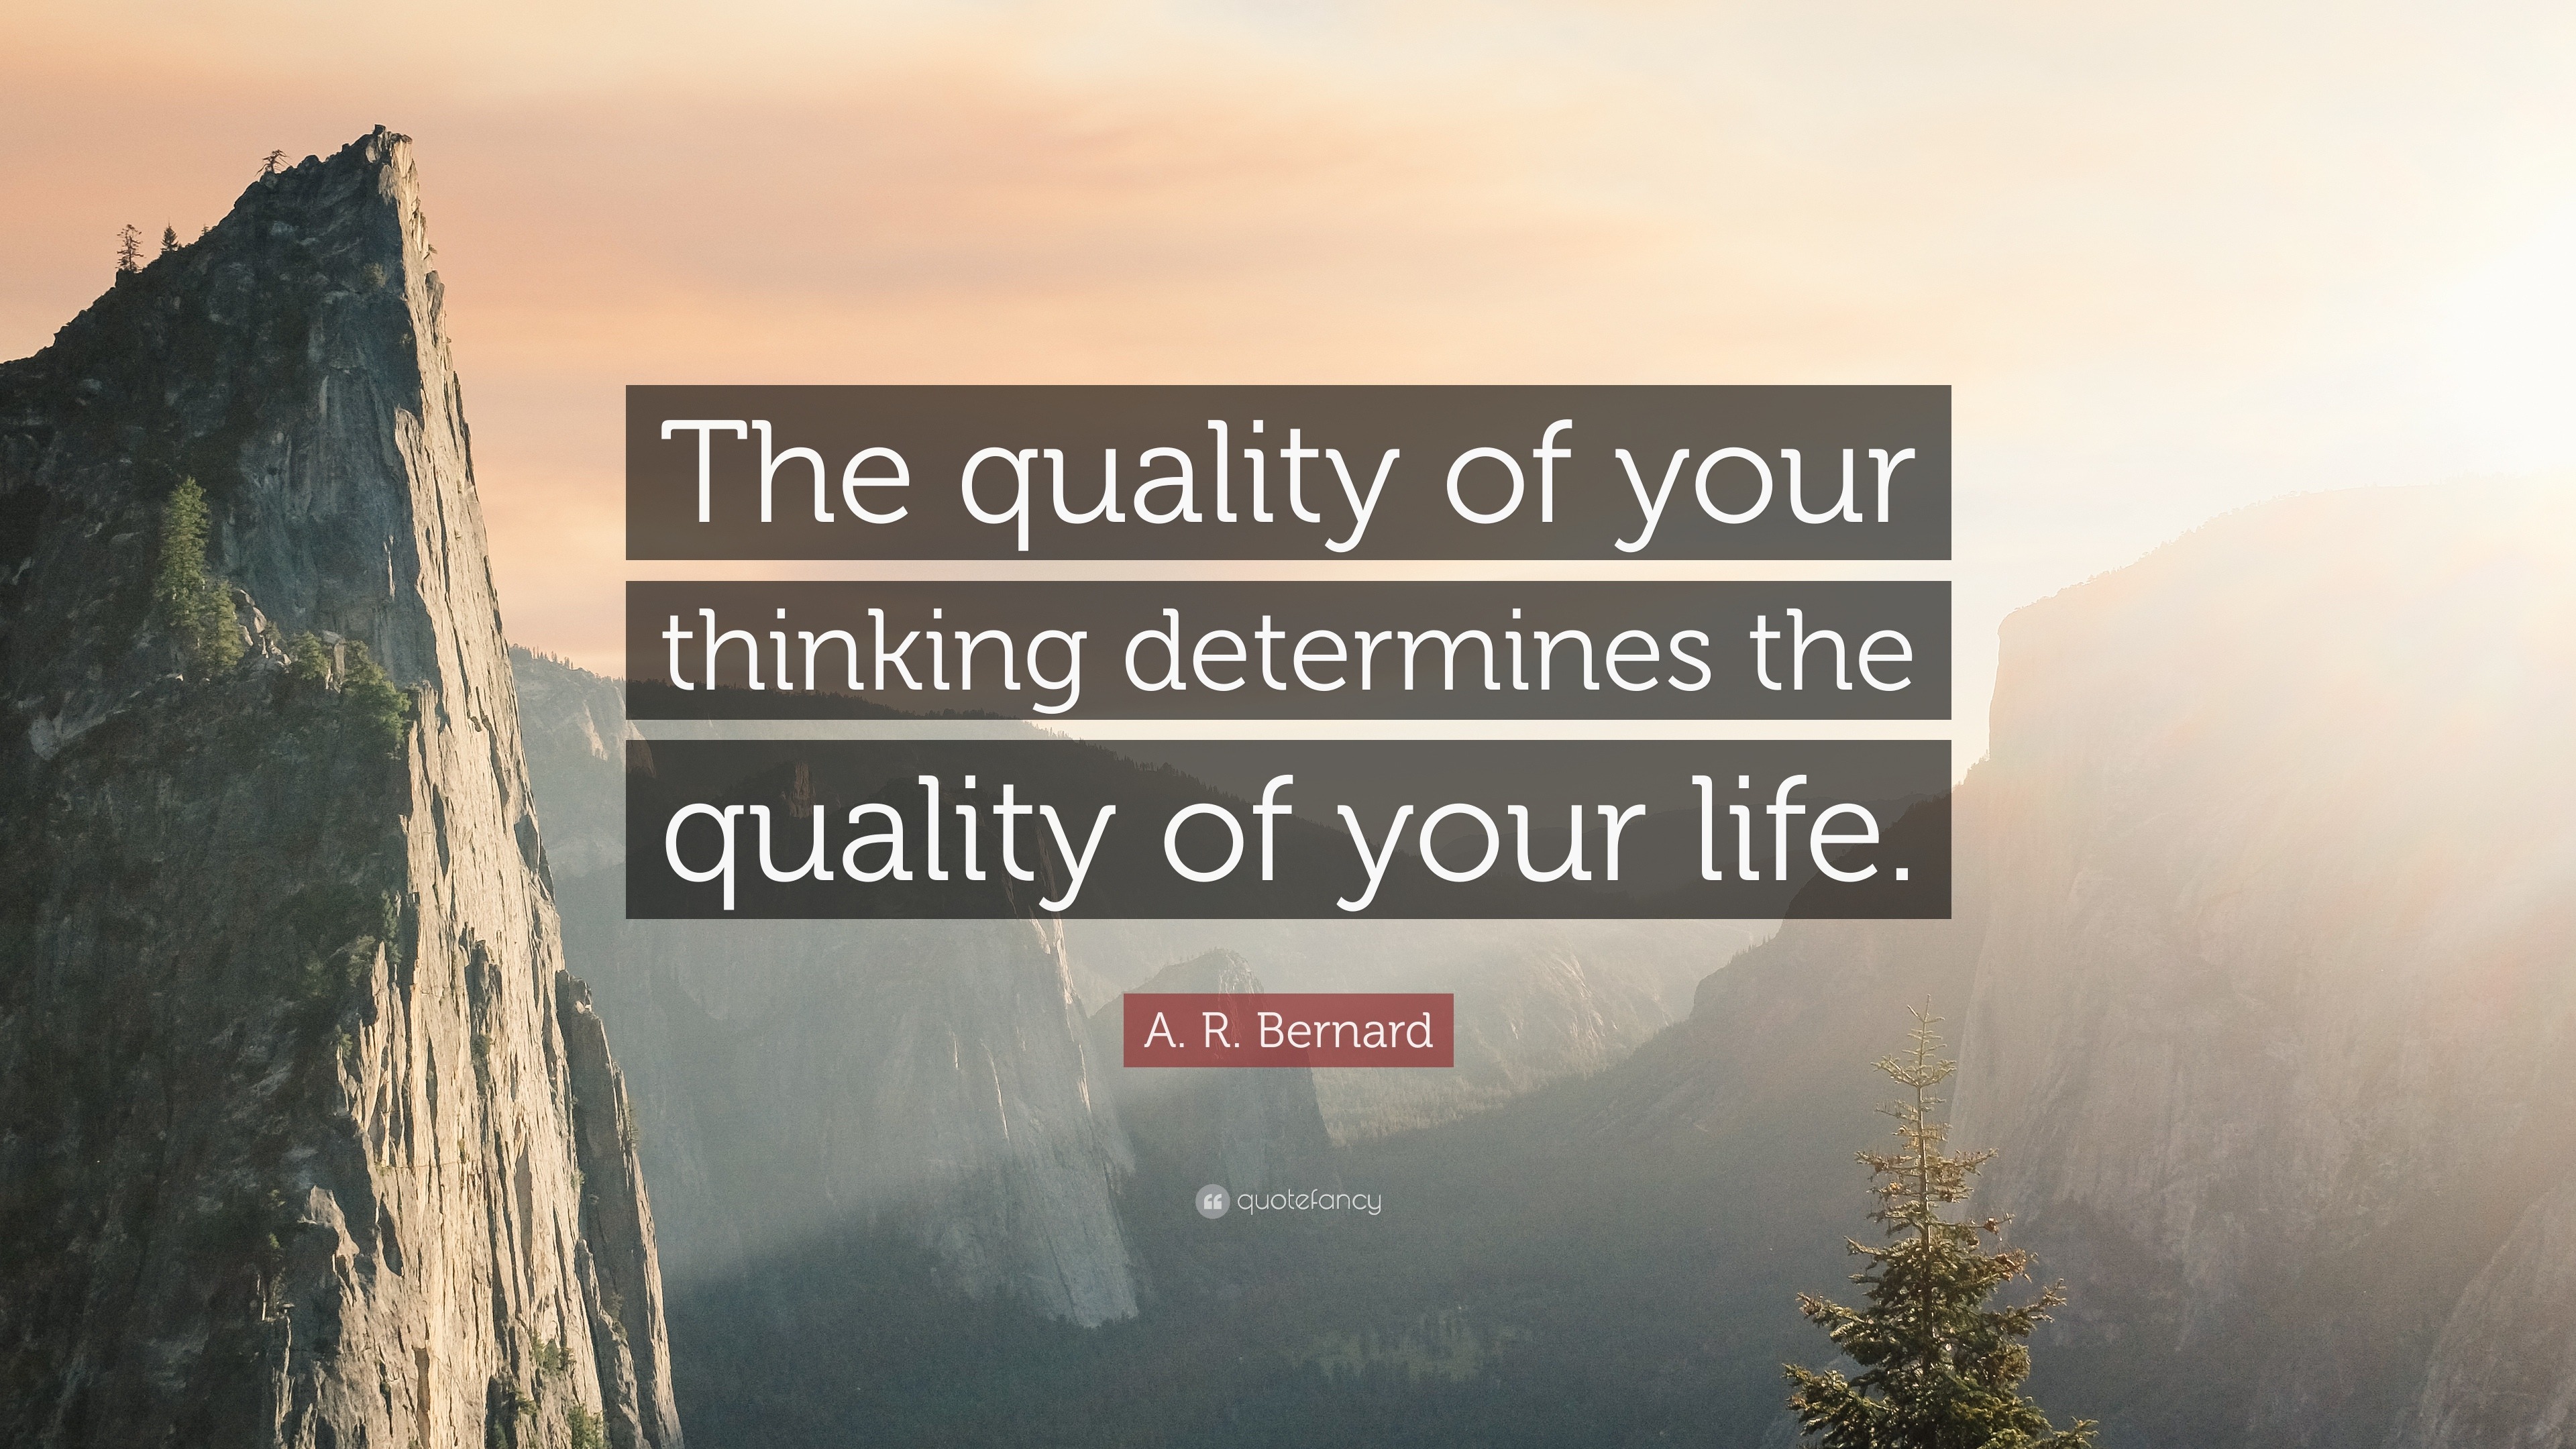 A. R. Bernard Quote: “The quality of your thinking determines the